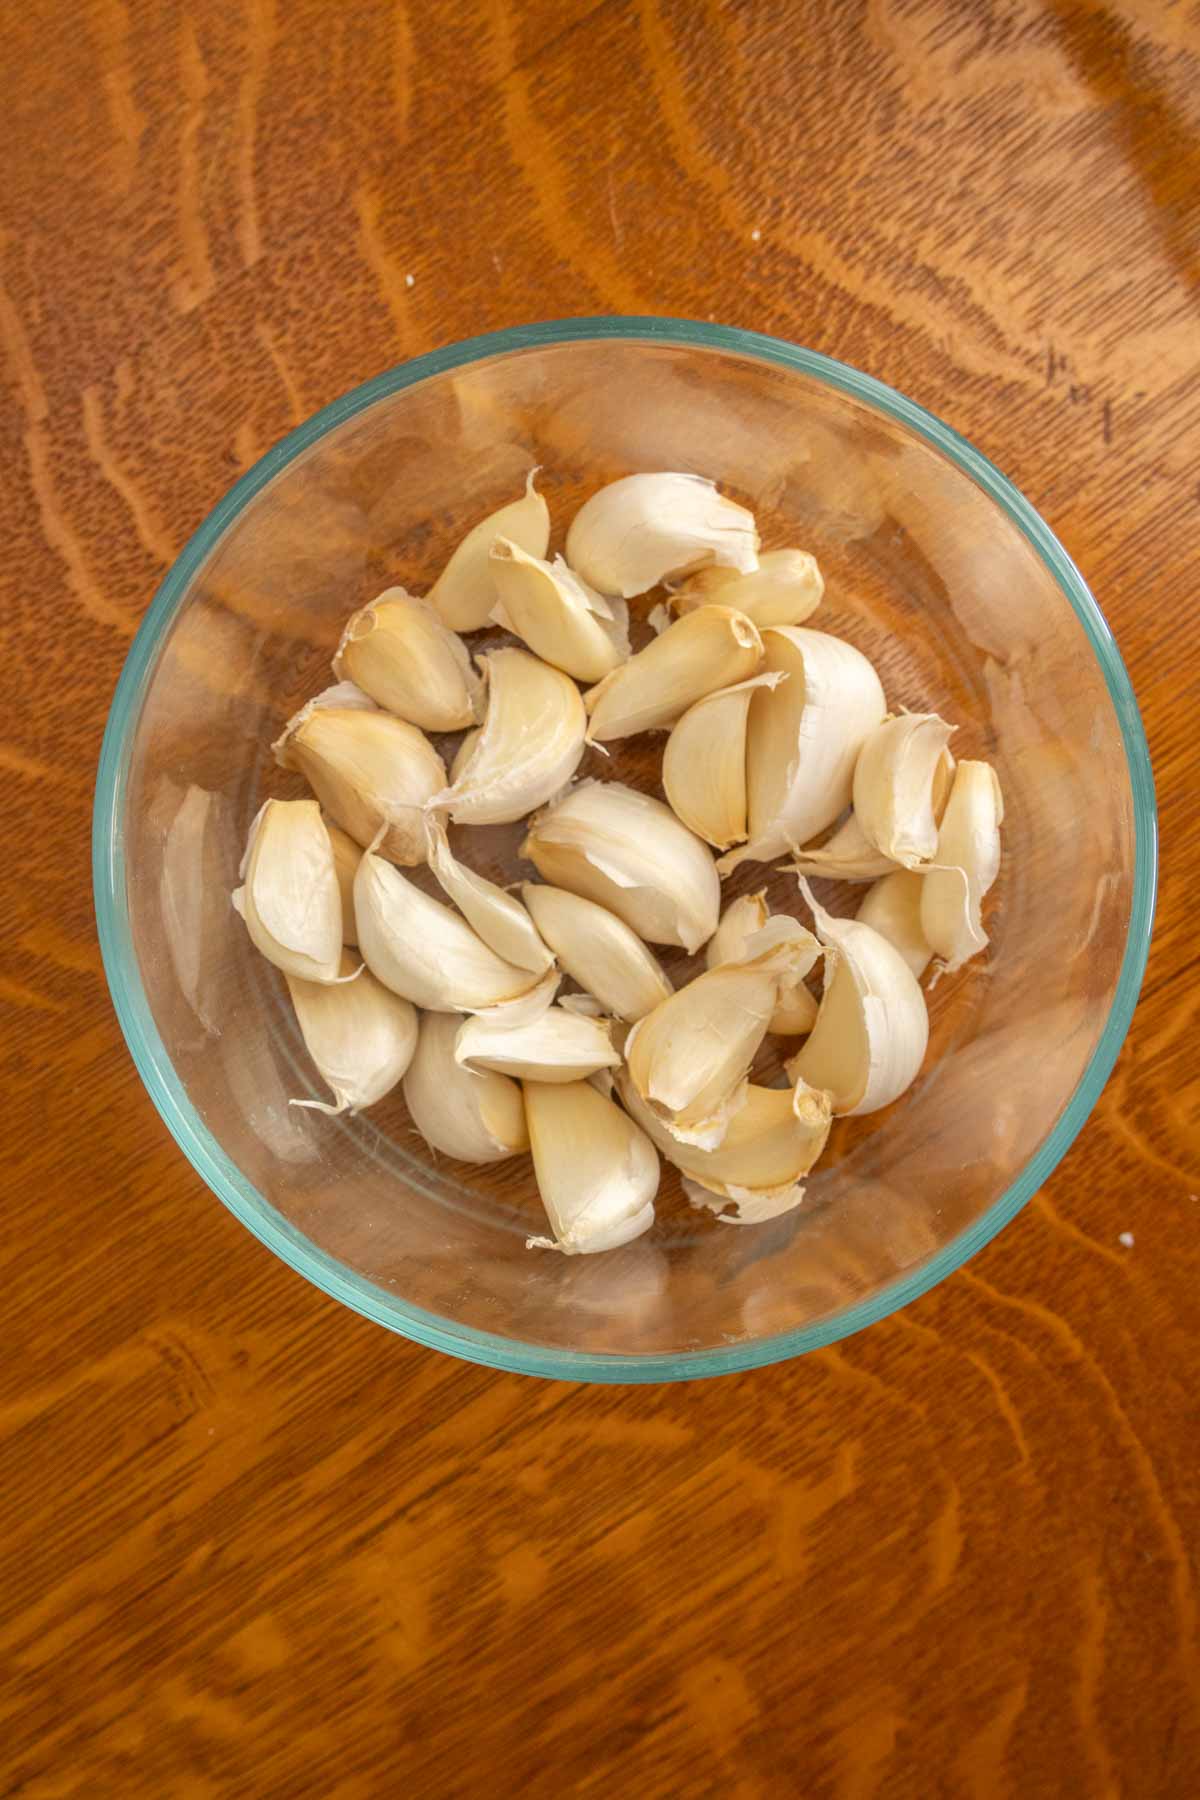 Garlic in a glass bowl on a wooden table.